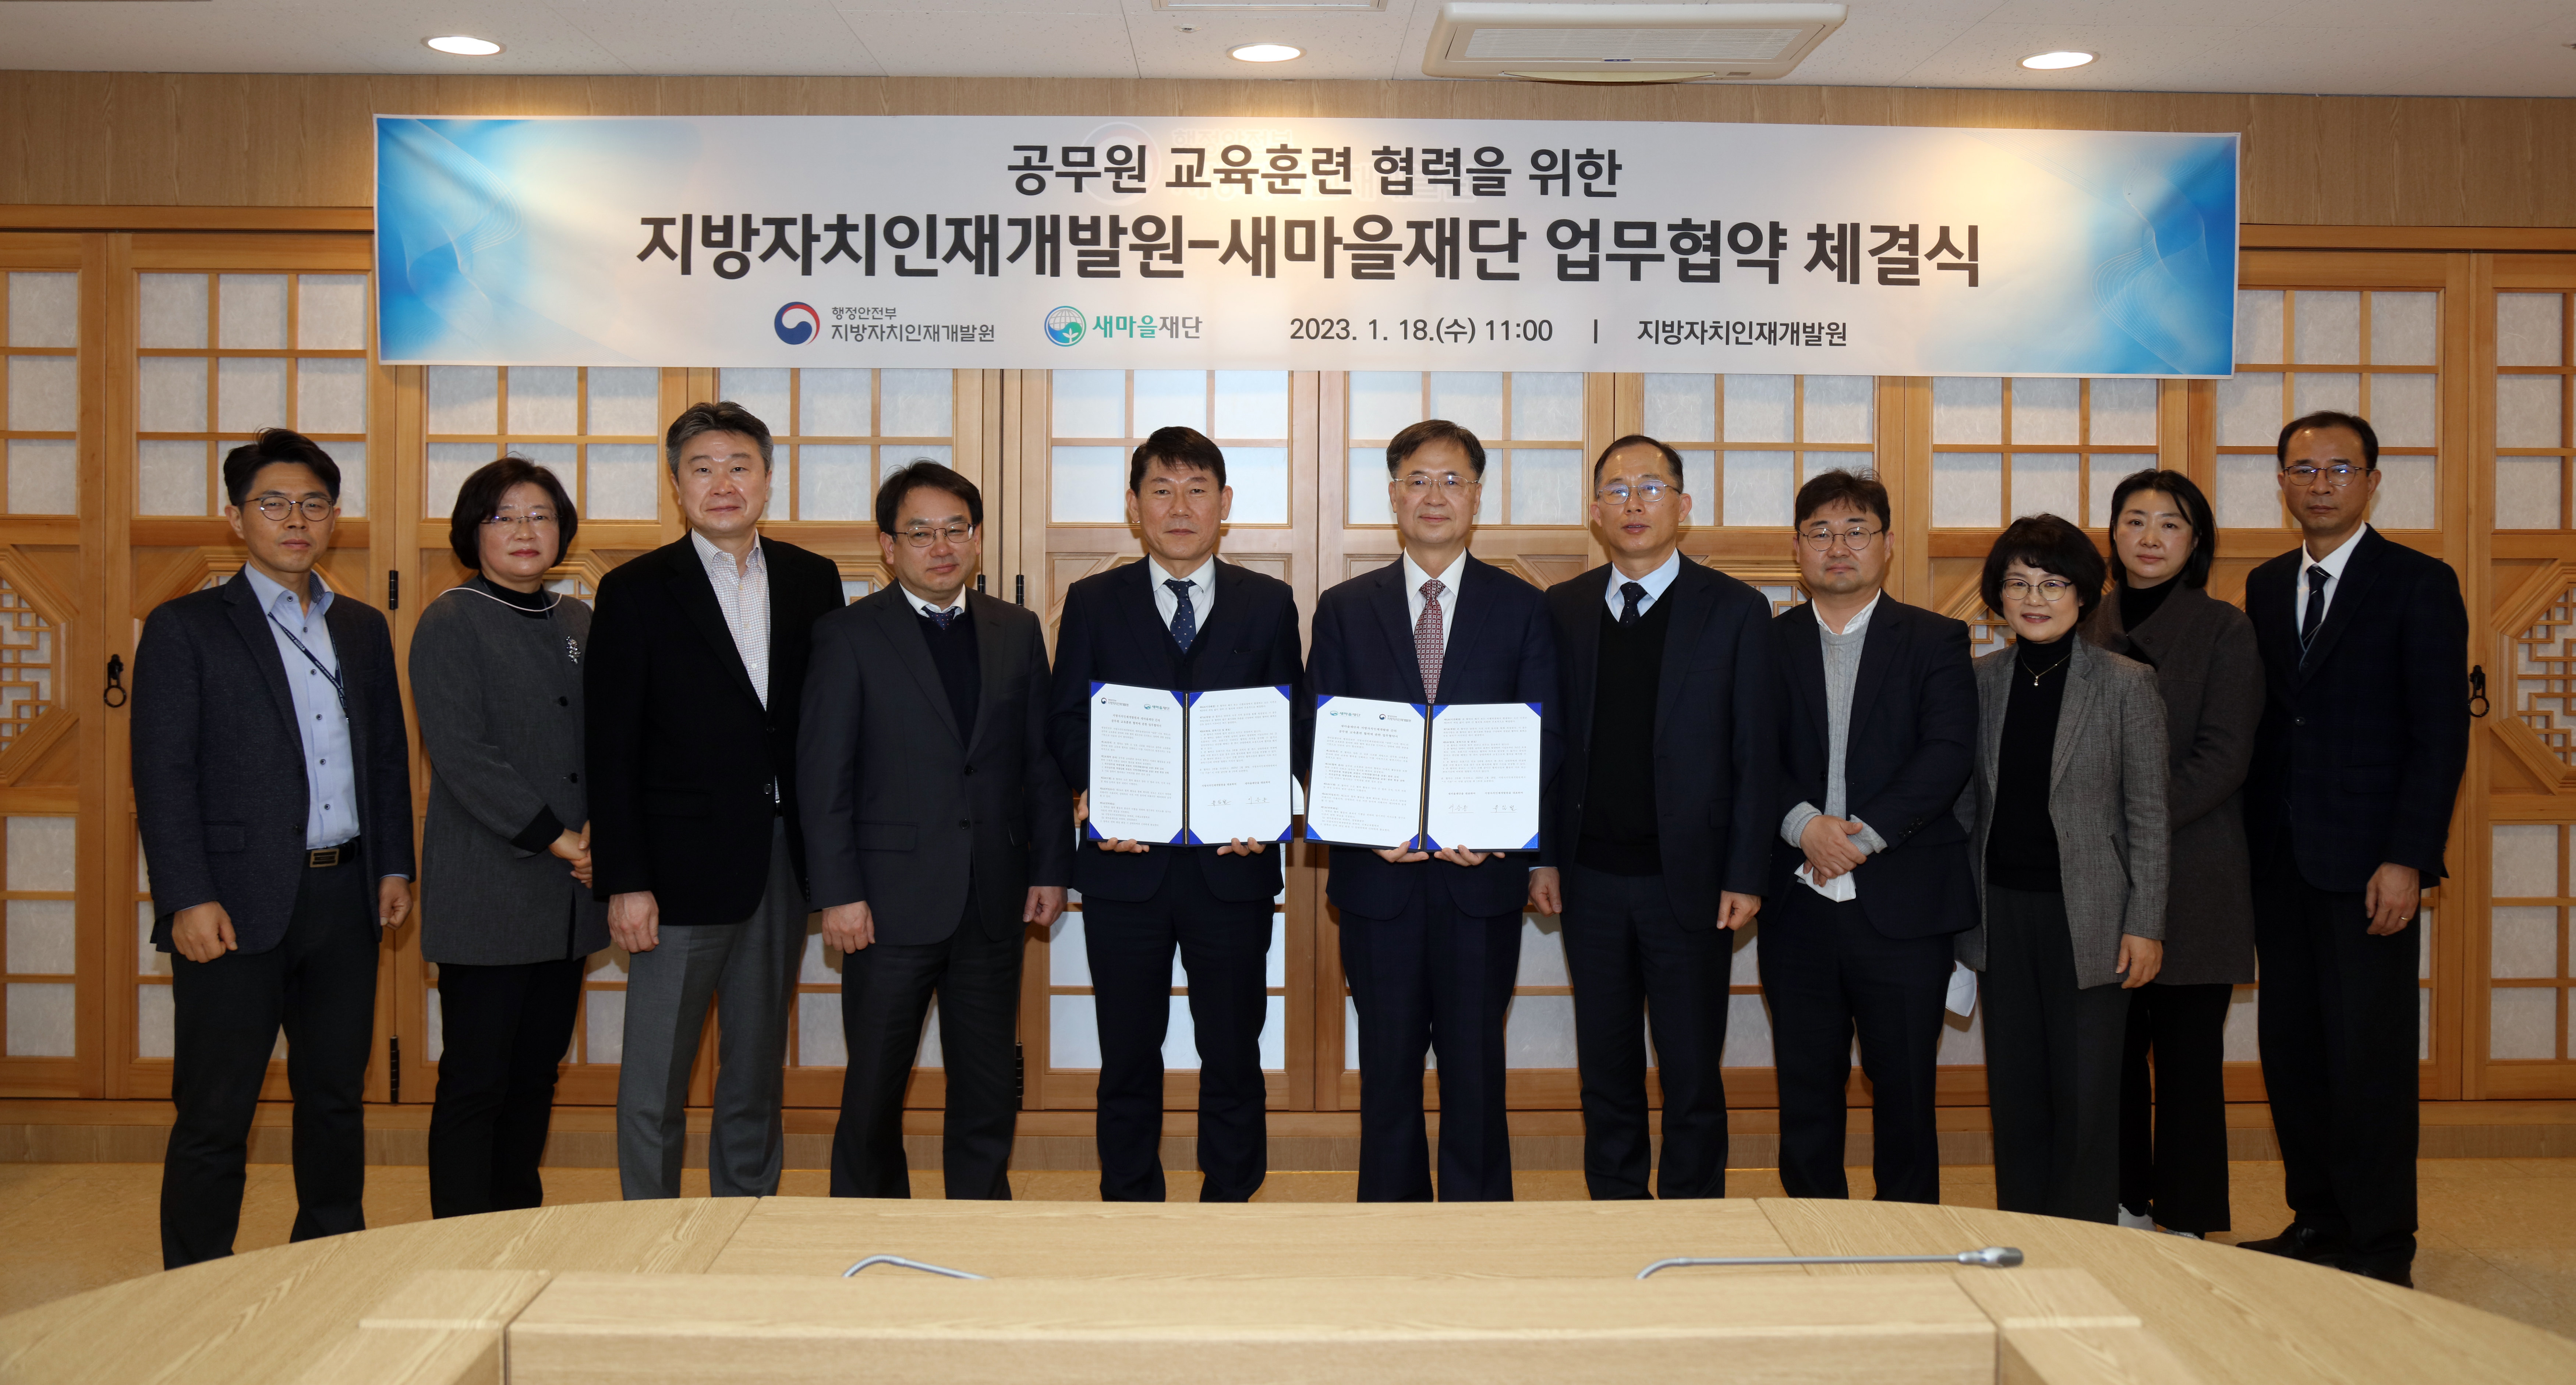 LOGODI and the SMUF Sign MoU to Share Korea's Regional Development Experiences with Foreign Officials